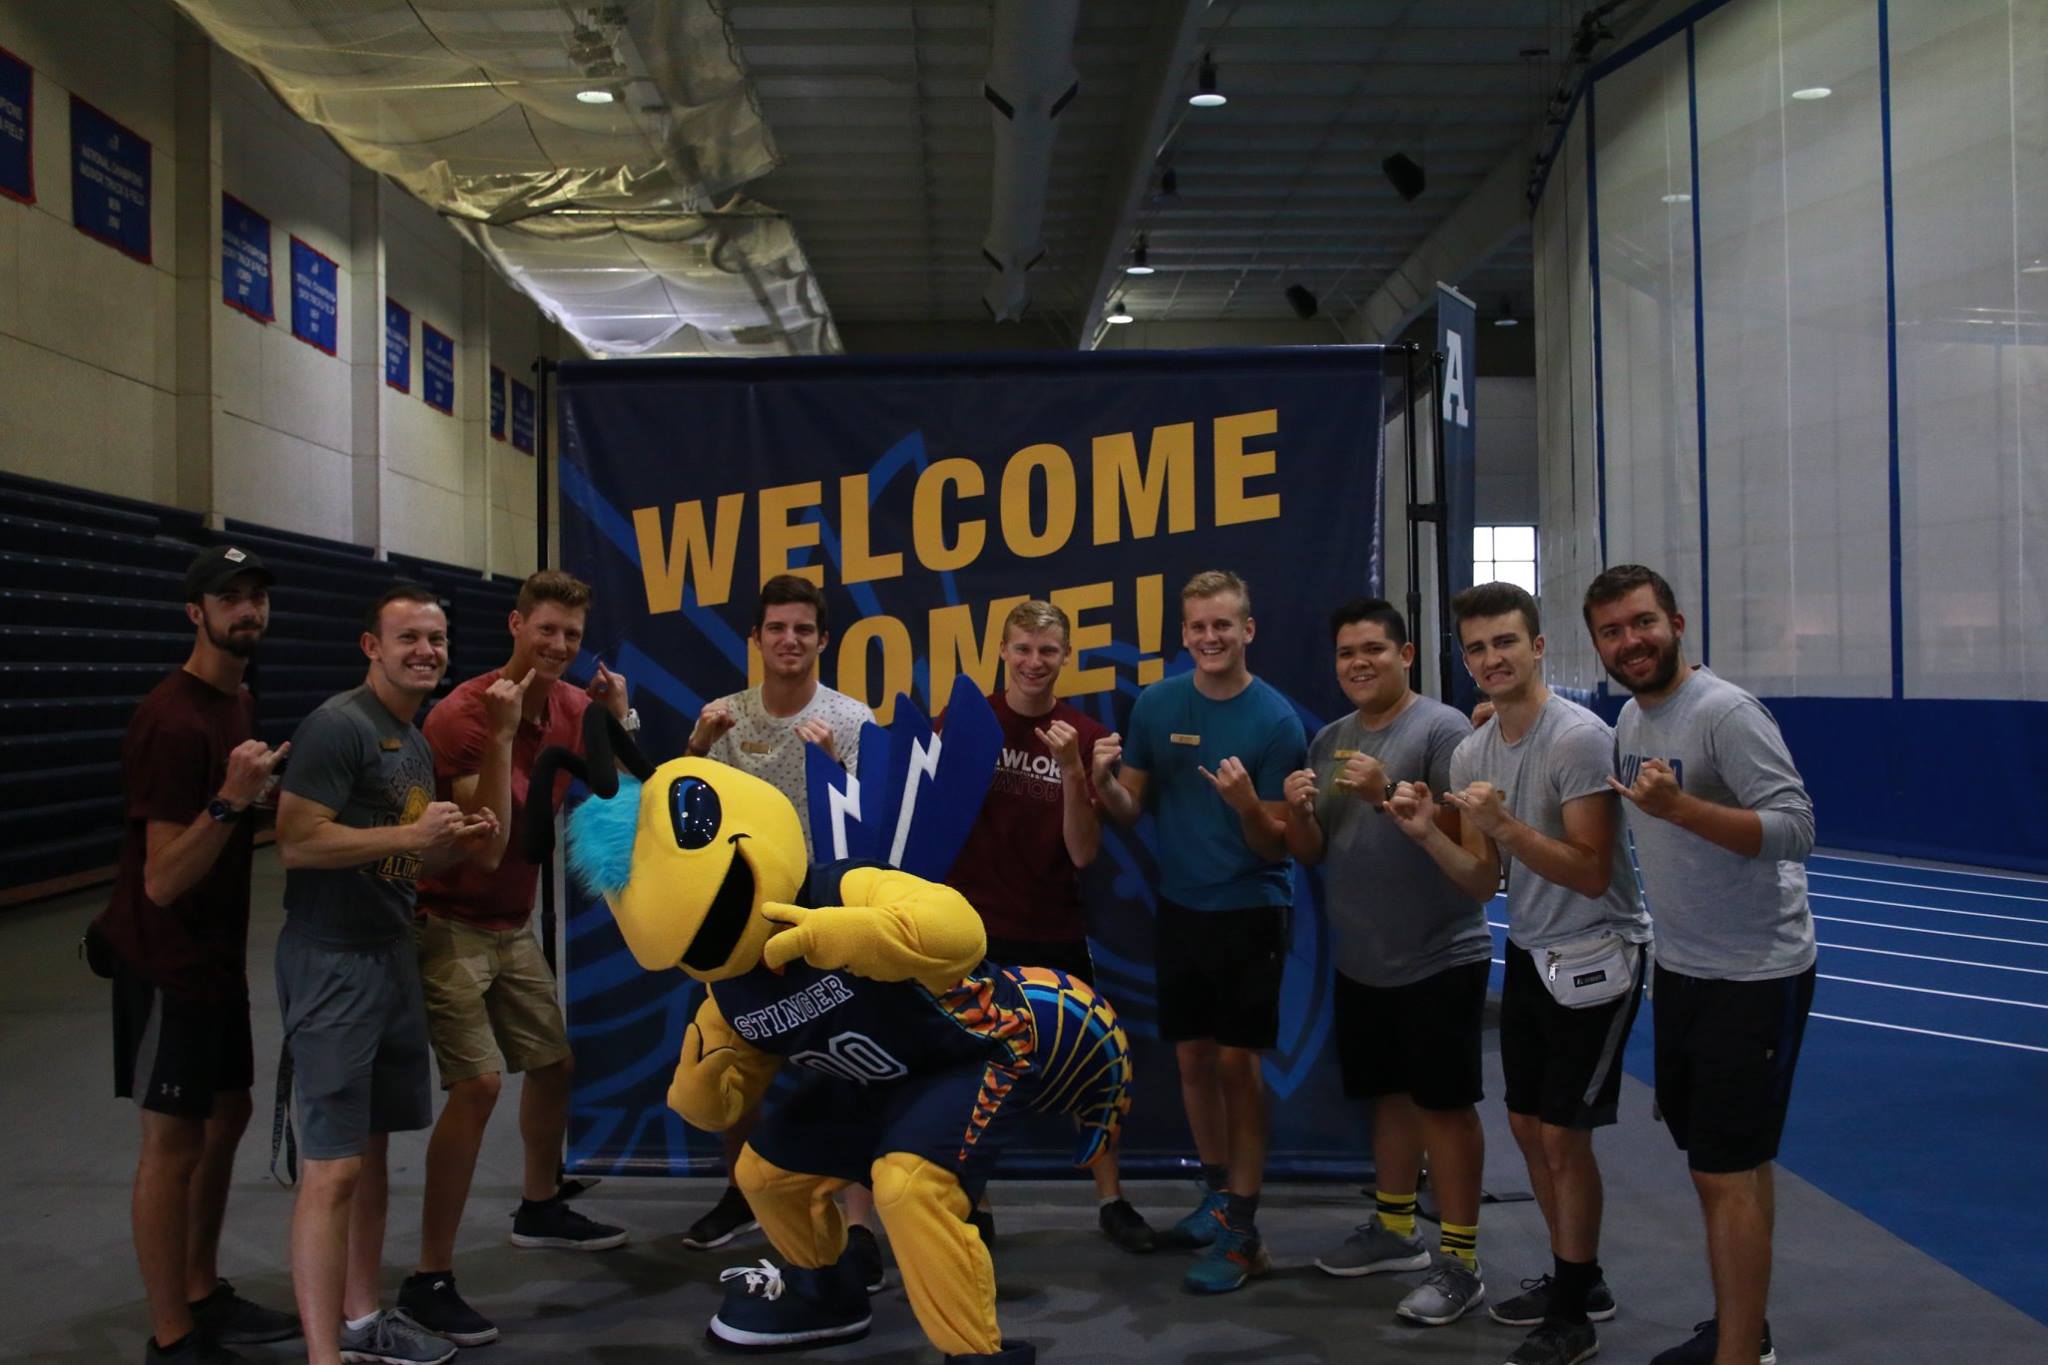 Students pose with Stinger during Getting Started